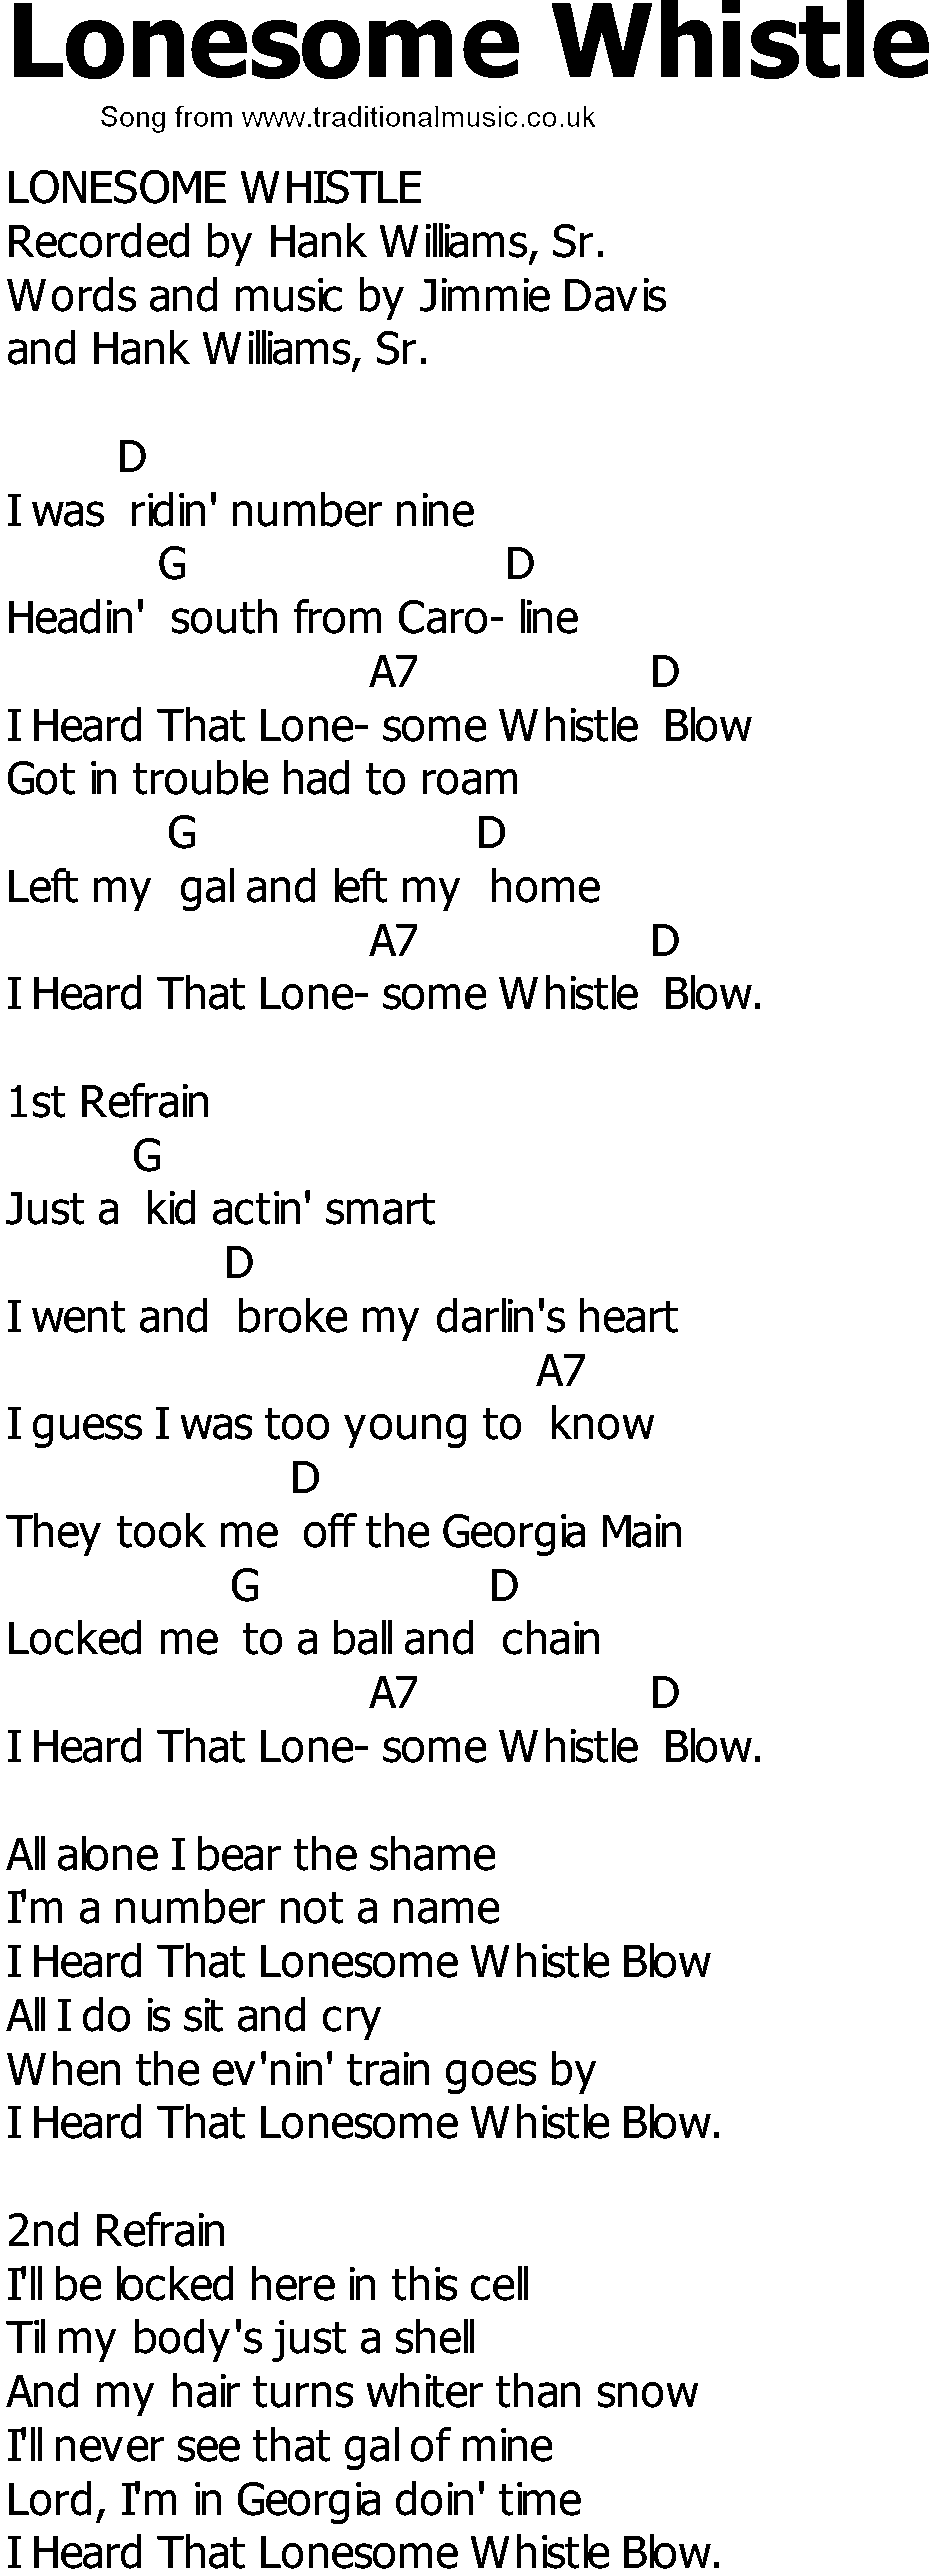 Old Country song lyrics with chords - Lonesome Whistle